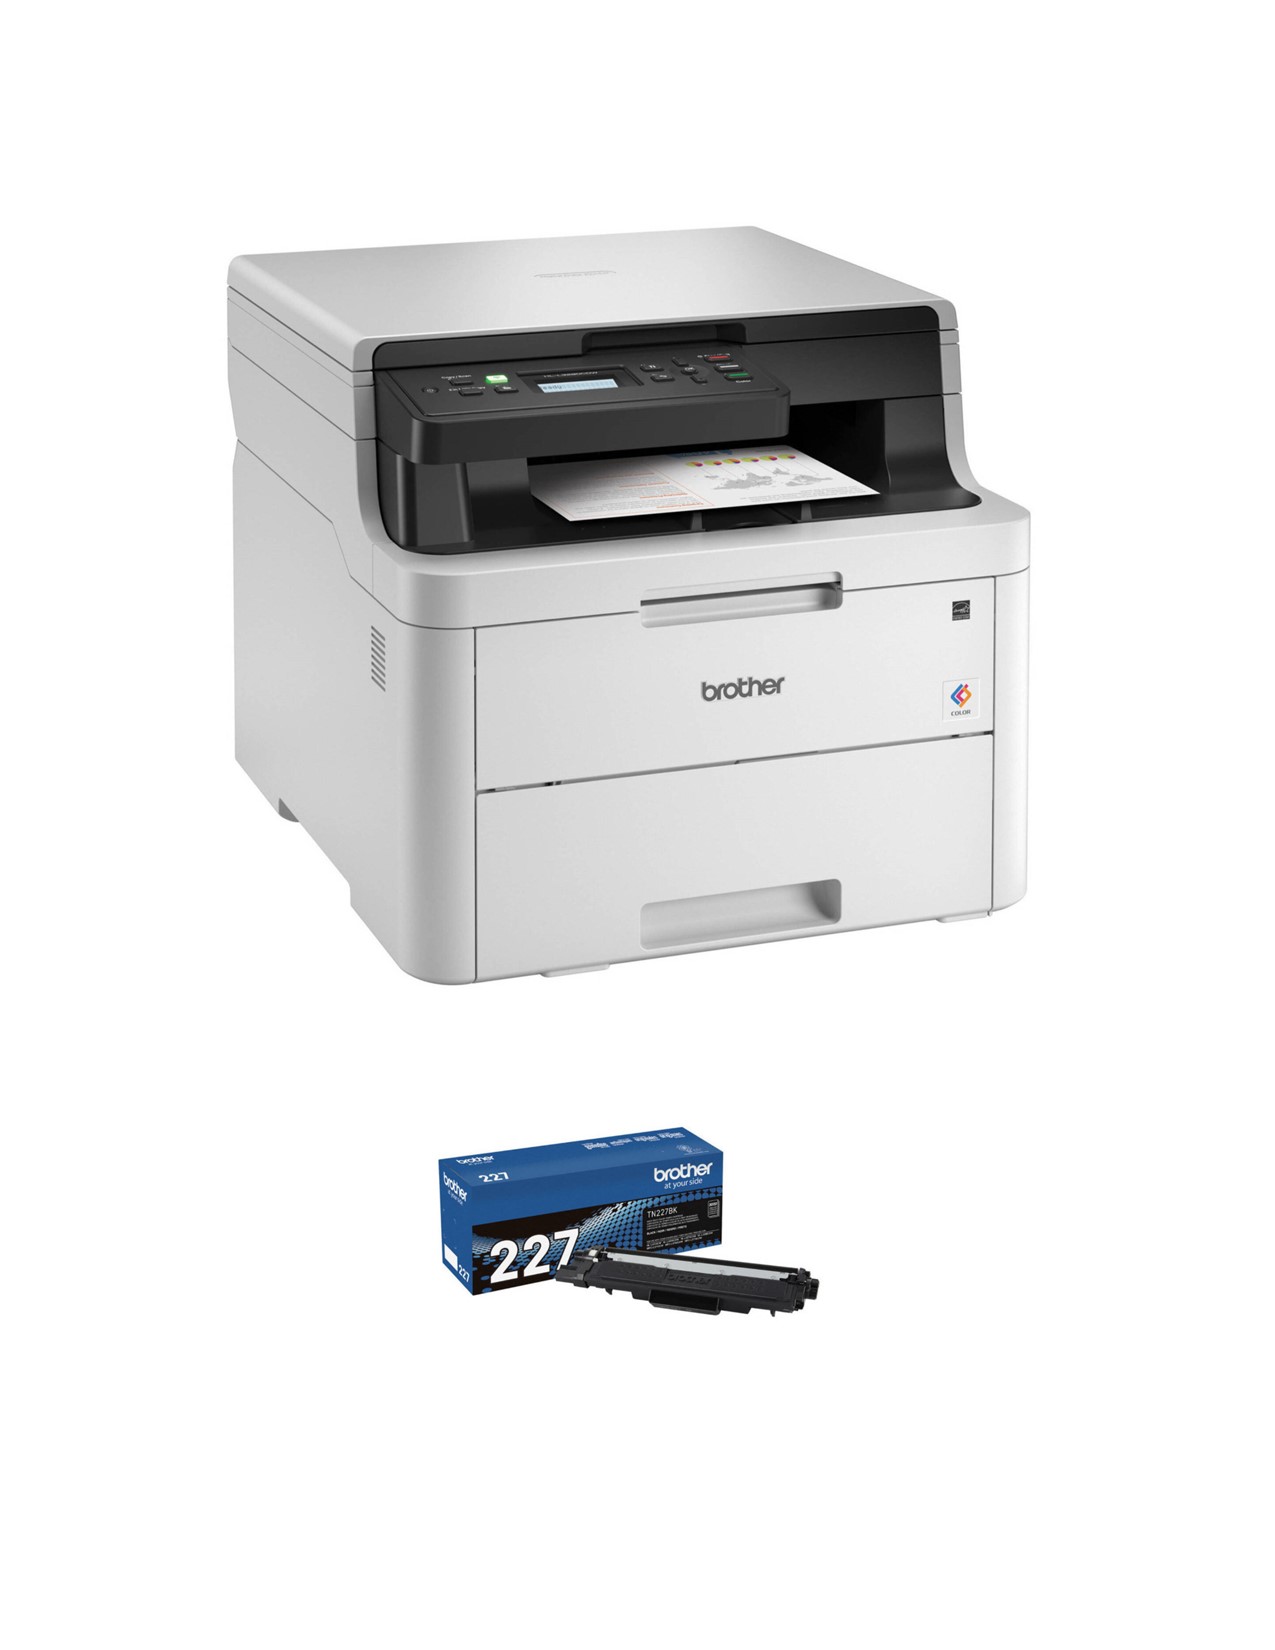 Brother HL-L3290CDW Compact Digital Color Printer with Flatbed Copy & Scan